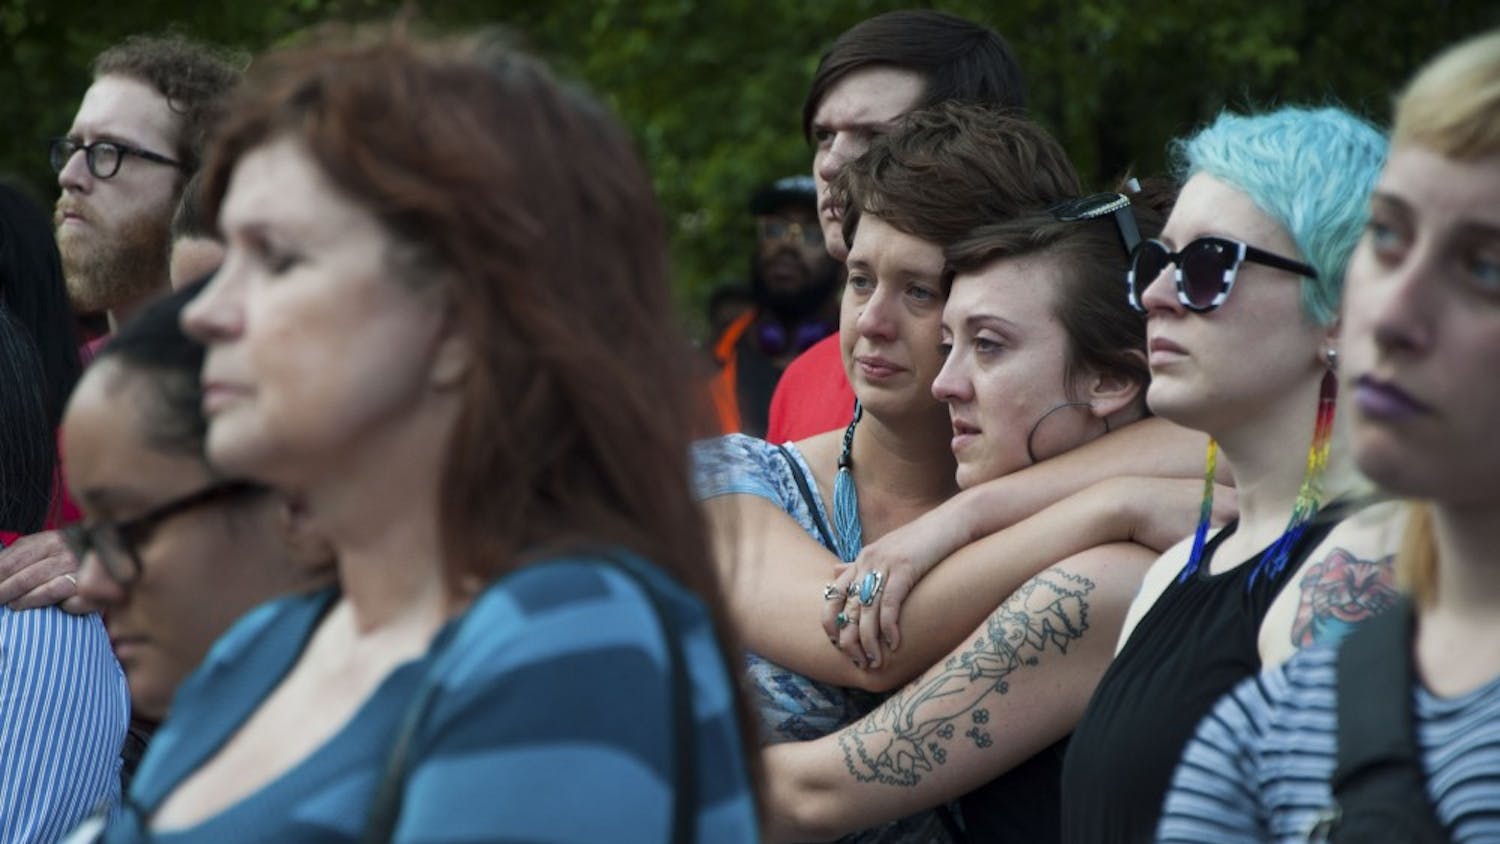 Victoria Brown, left, and Lily Regina comfort each other during the vigil on Tuesday evening at the Bloomington City Hall.